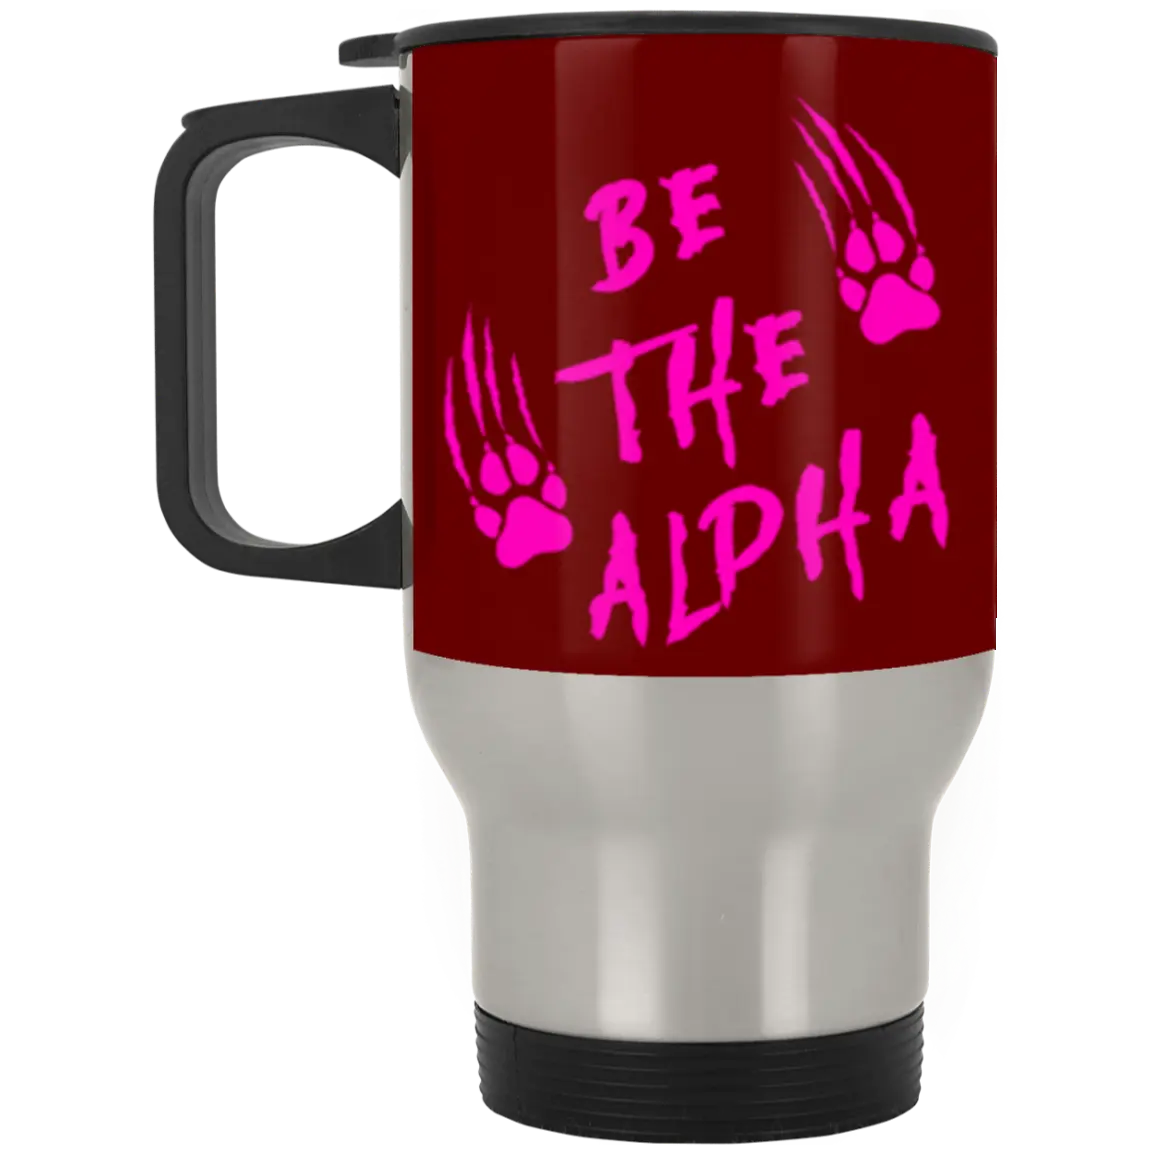 Be the Alpha Pink Silver Stainless Travel Mug - Image #3